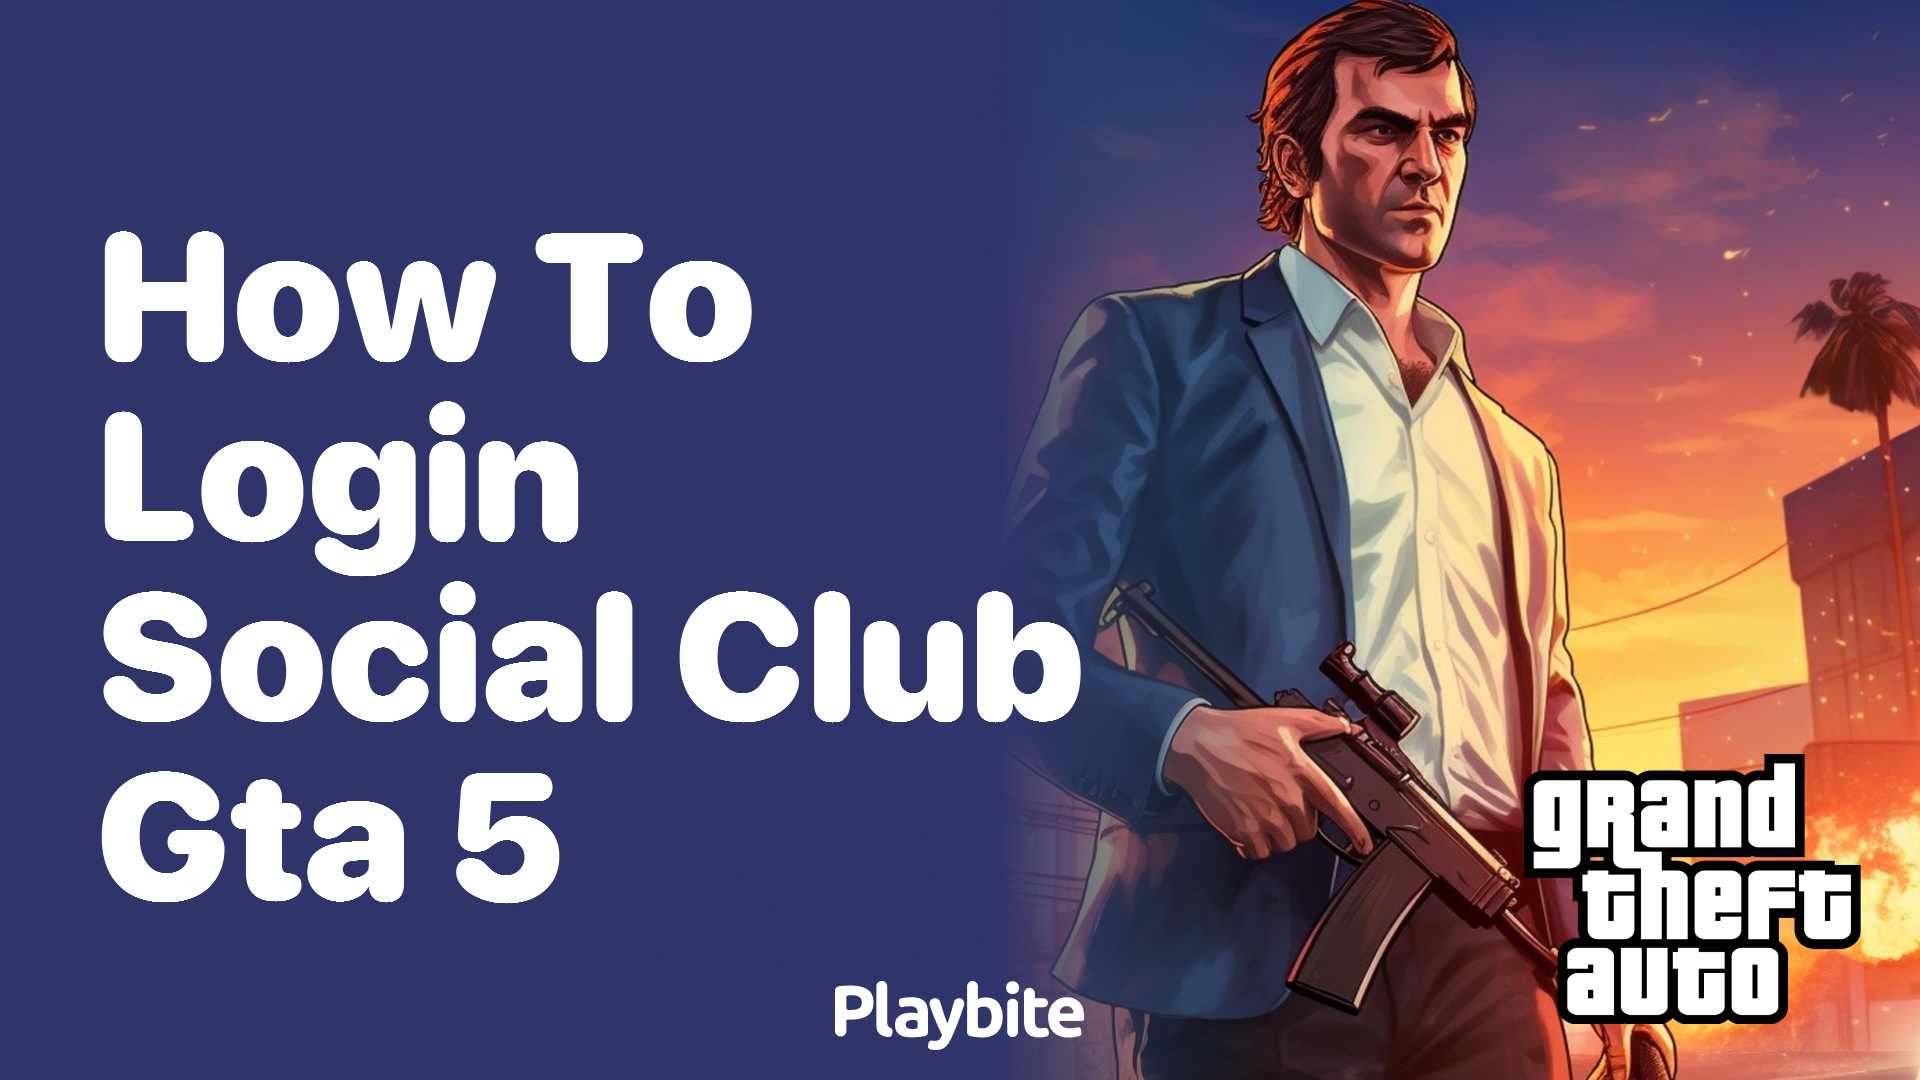 How to login to Social Club in GTA 5